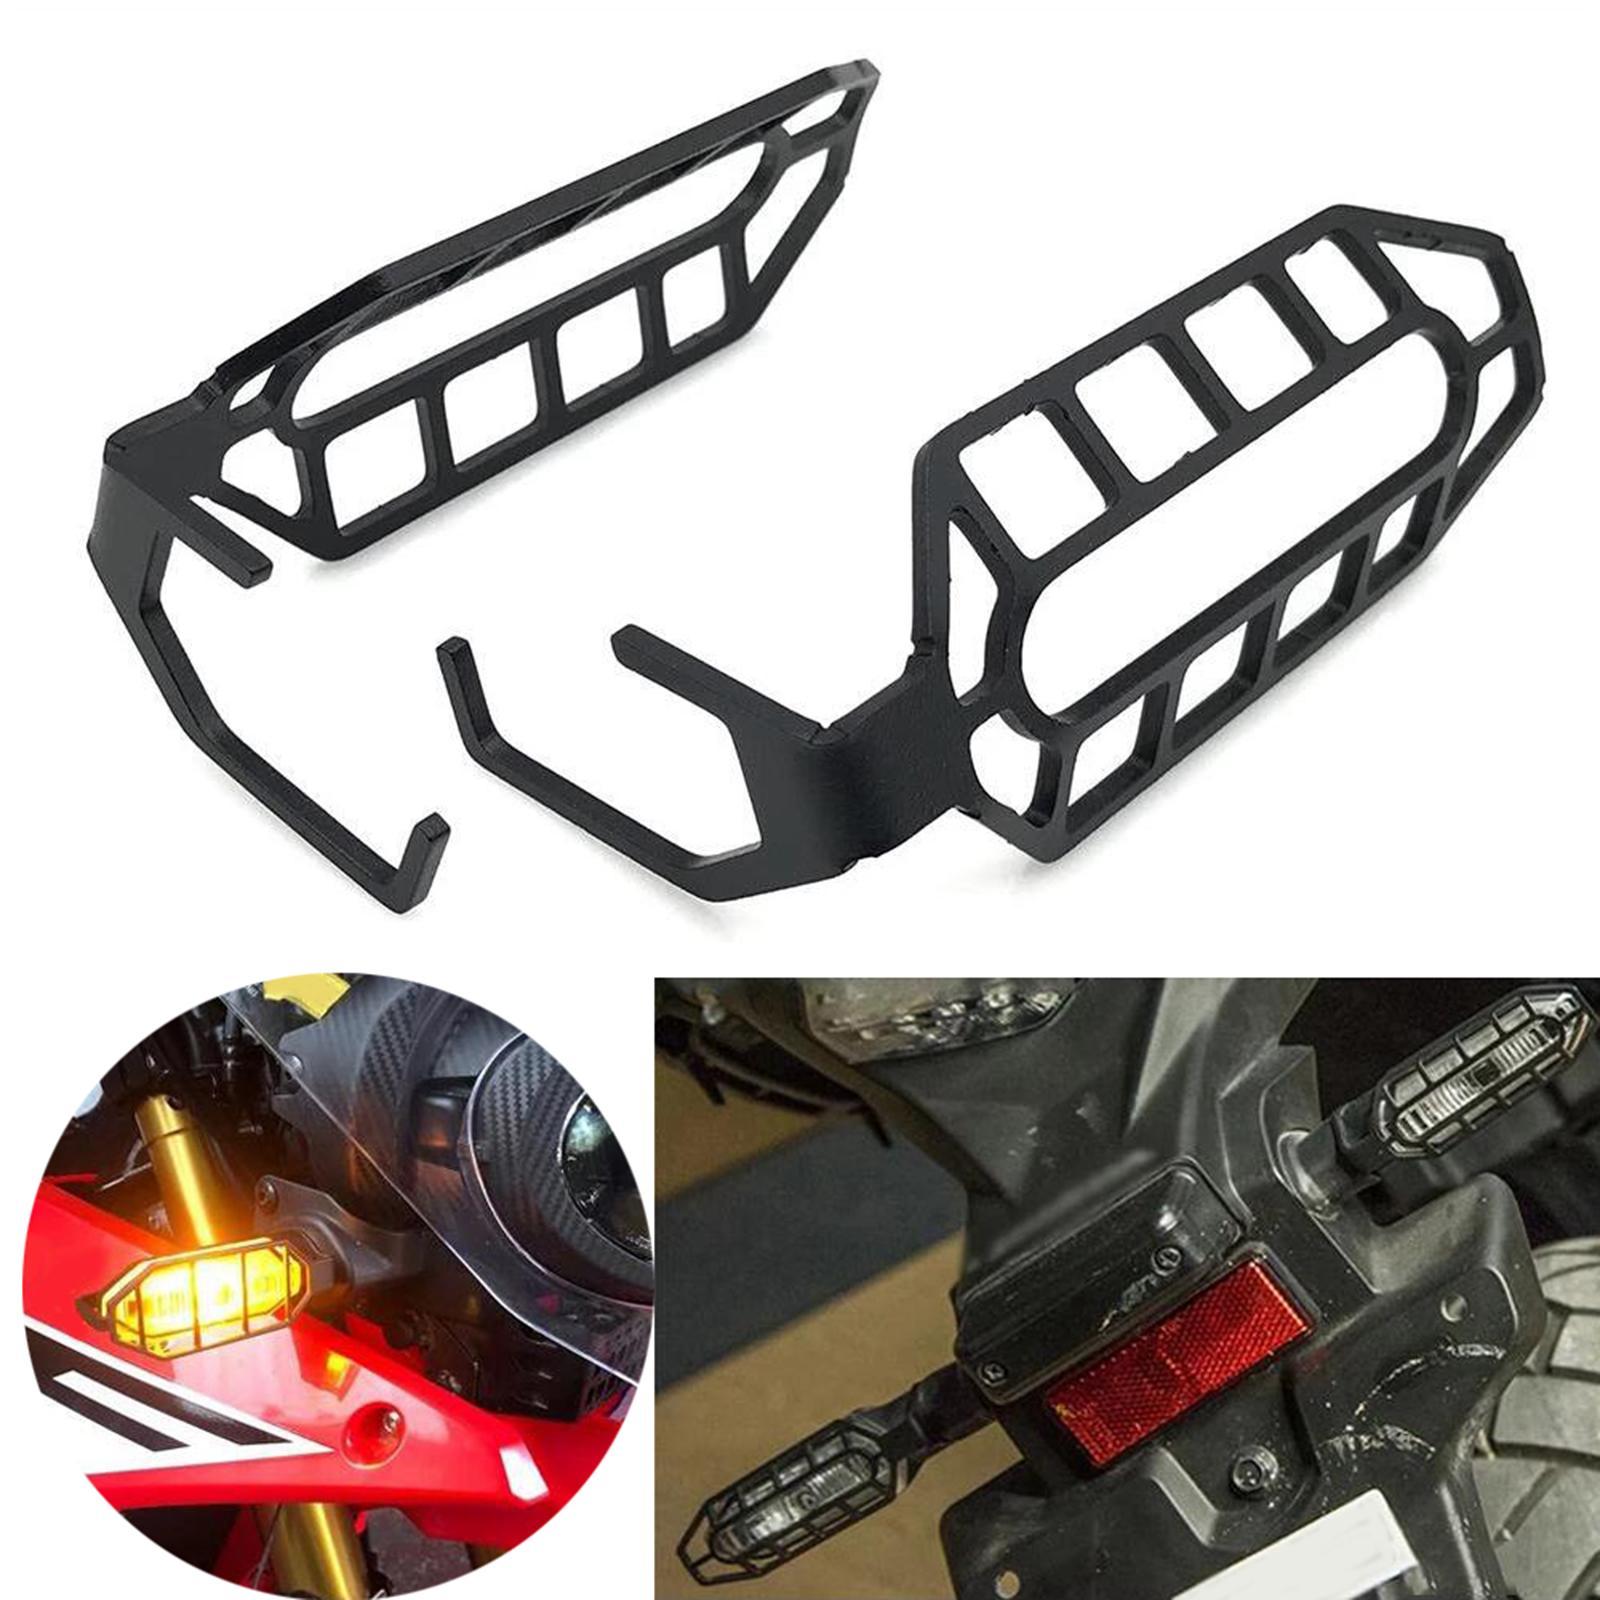 2xTurn Signal Light Protection Protector Cover for CB500X 2019 2020 2021